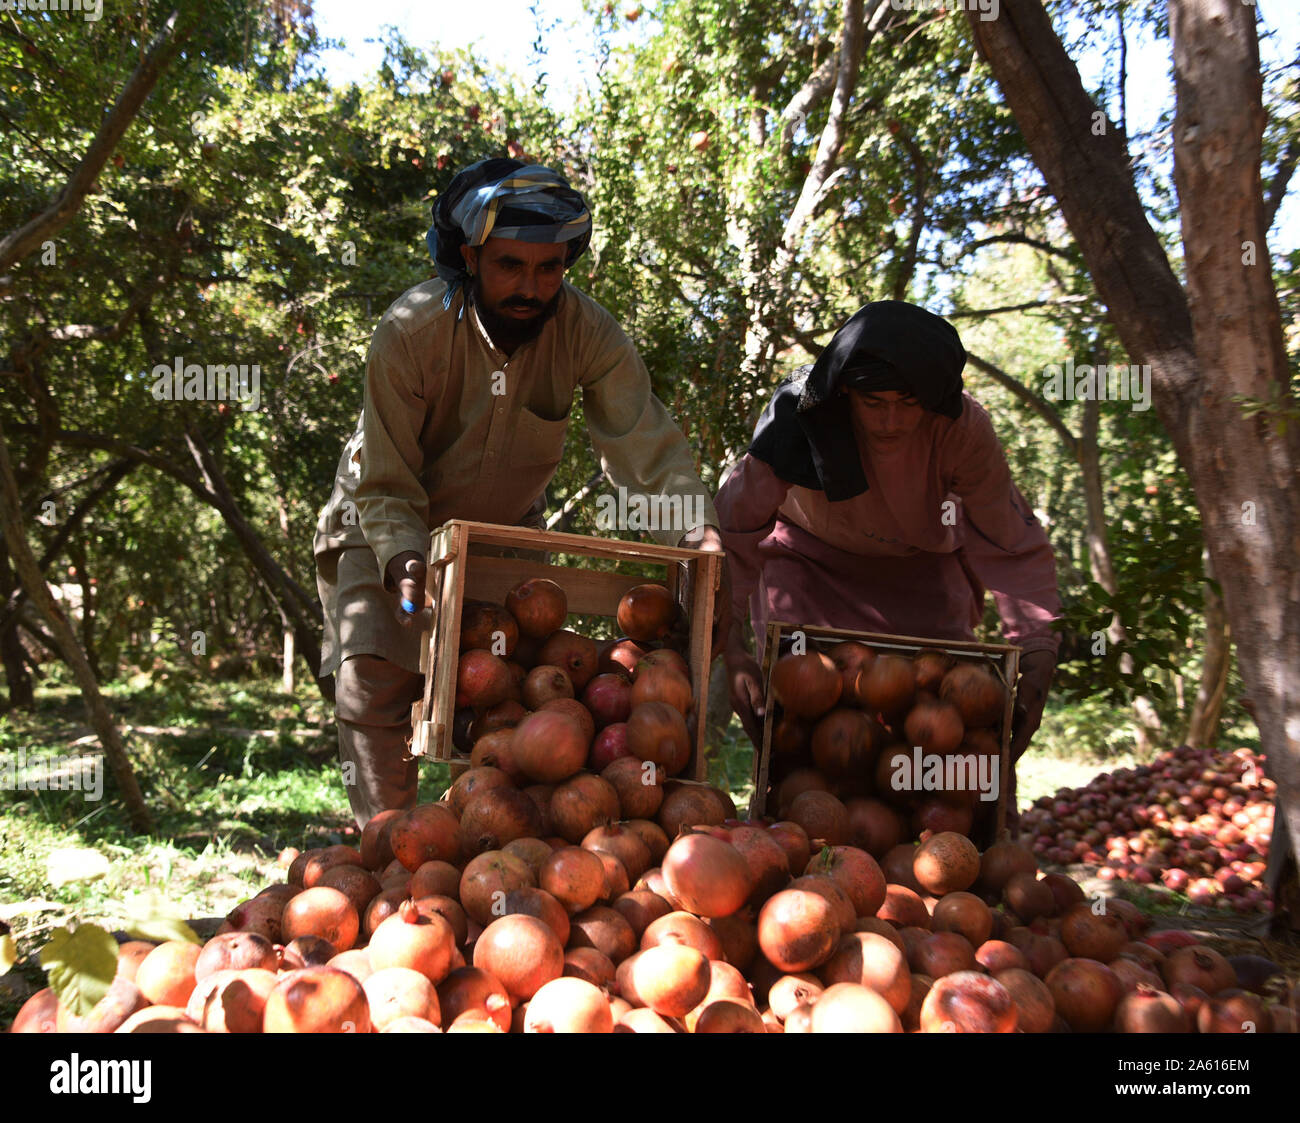 Kandahar, Afghanistan. 21st Oct, 2019. Afghan farmers pile up harvested pomegranates at an orchard in Arghandab district of Kandahar province, Afghanistan, Oct. 21, 2019. The southern Kandahar province is famous for its flavorsome pomegranates while Local pomegranate farmers are looking forward to find bigger markets outside of their war-battered country. Credit: Sanaullah Seaim/Xinhua/Alamy Live News Stock Photo